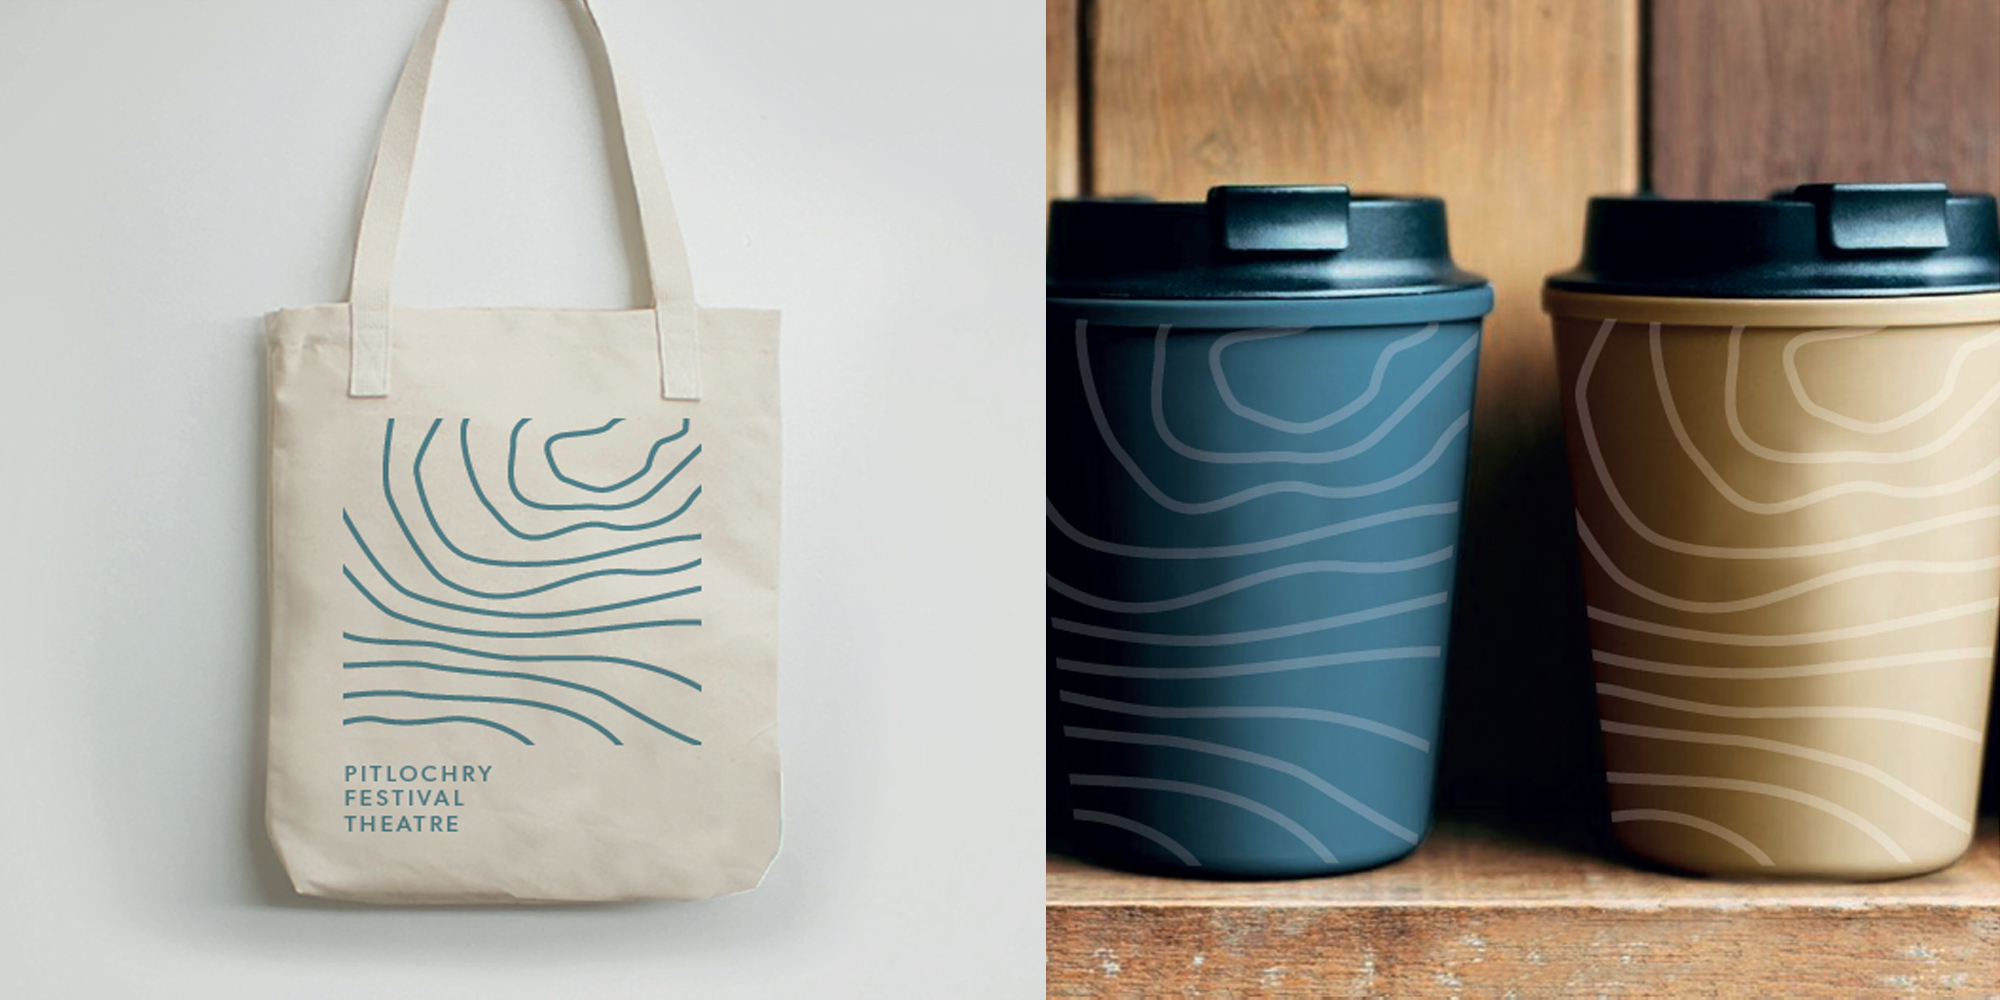 On the left hand side of the image is a cream canvas bag with the Theatre logo on it in a blue colour. On the right hand side are two coffee cups on a wooden shelf, one in a blue colour and one in a sandy golden colour.